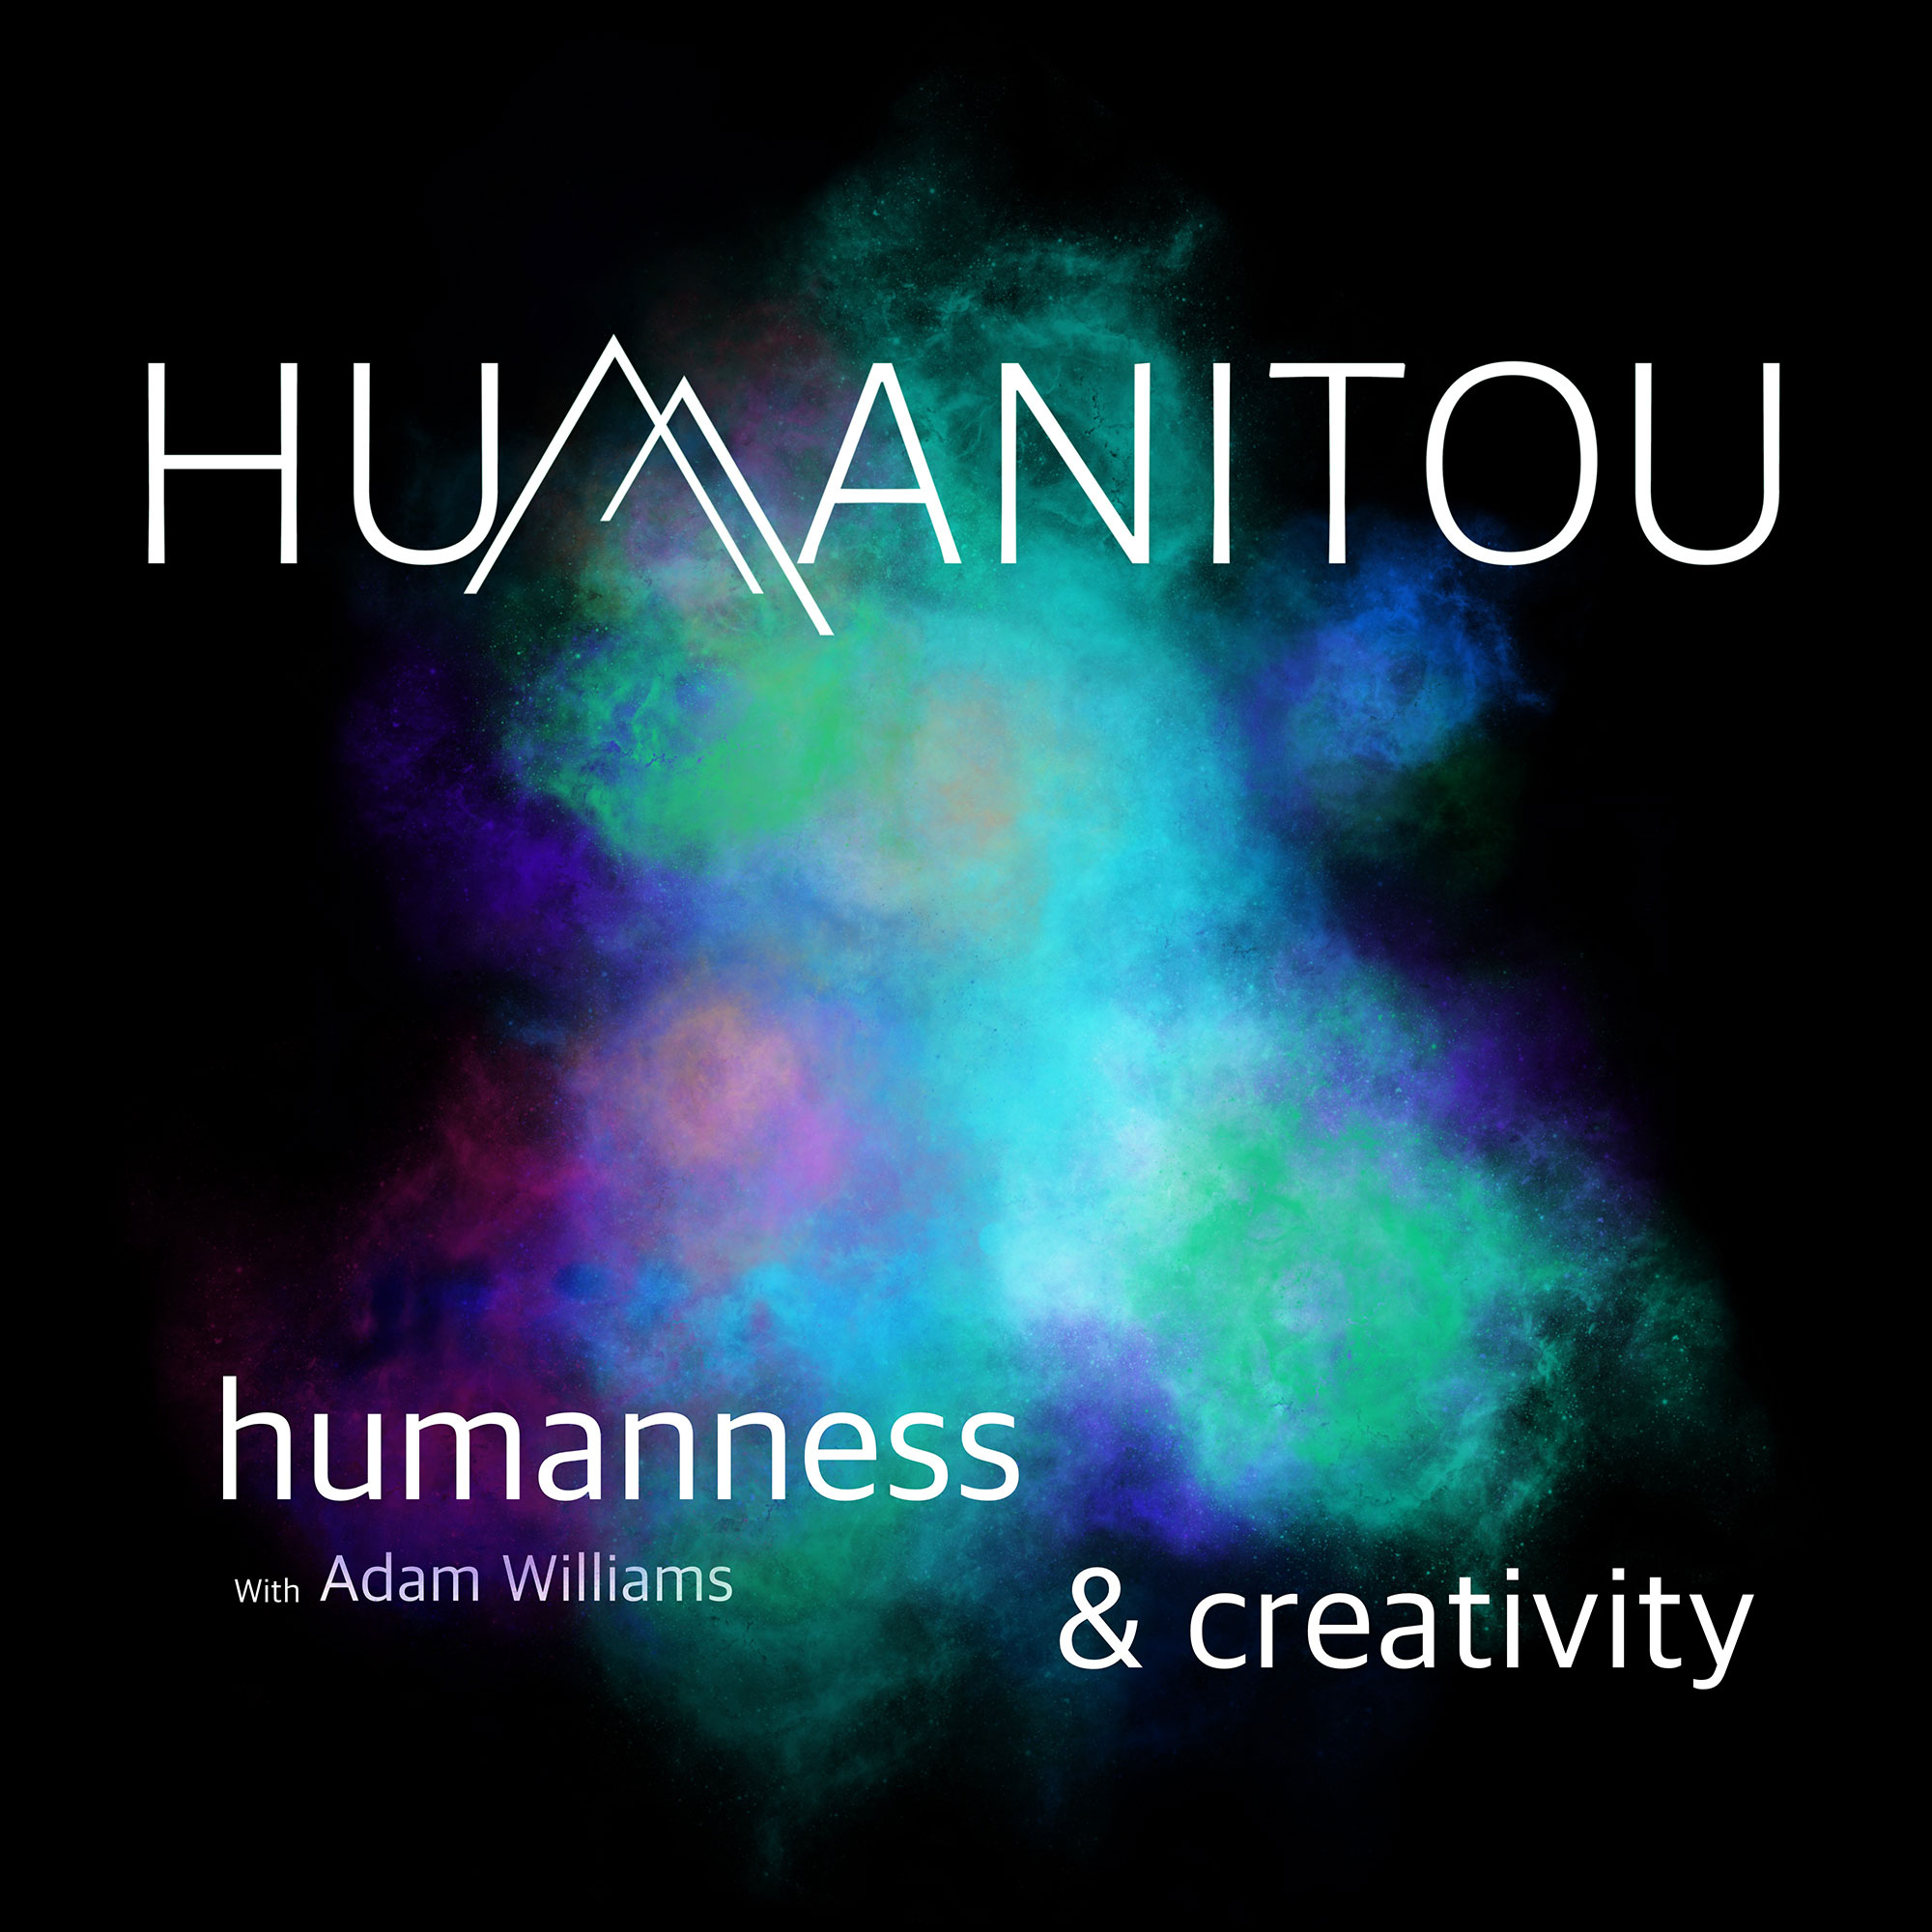 Best of Humanitou: Steven Pressfield, best-selling author of The War of Art, on creative Resistance, fear & love, & tuning into the cosmic radio station